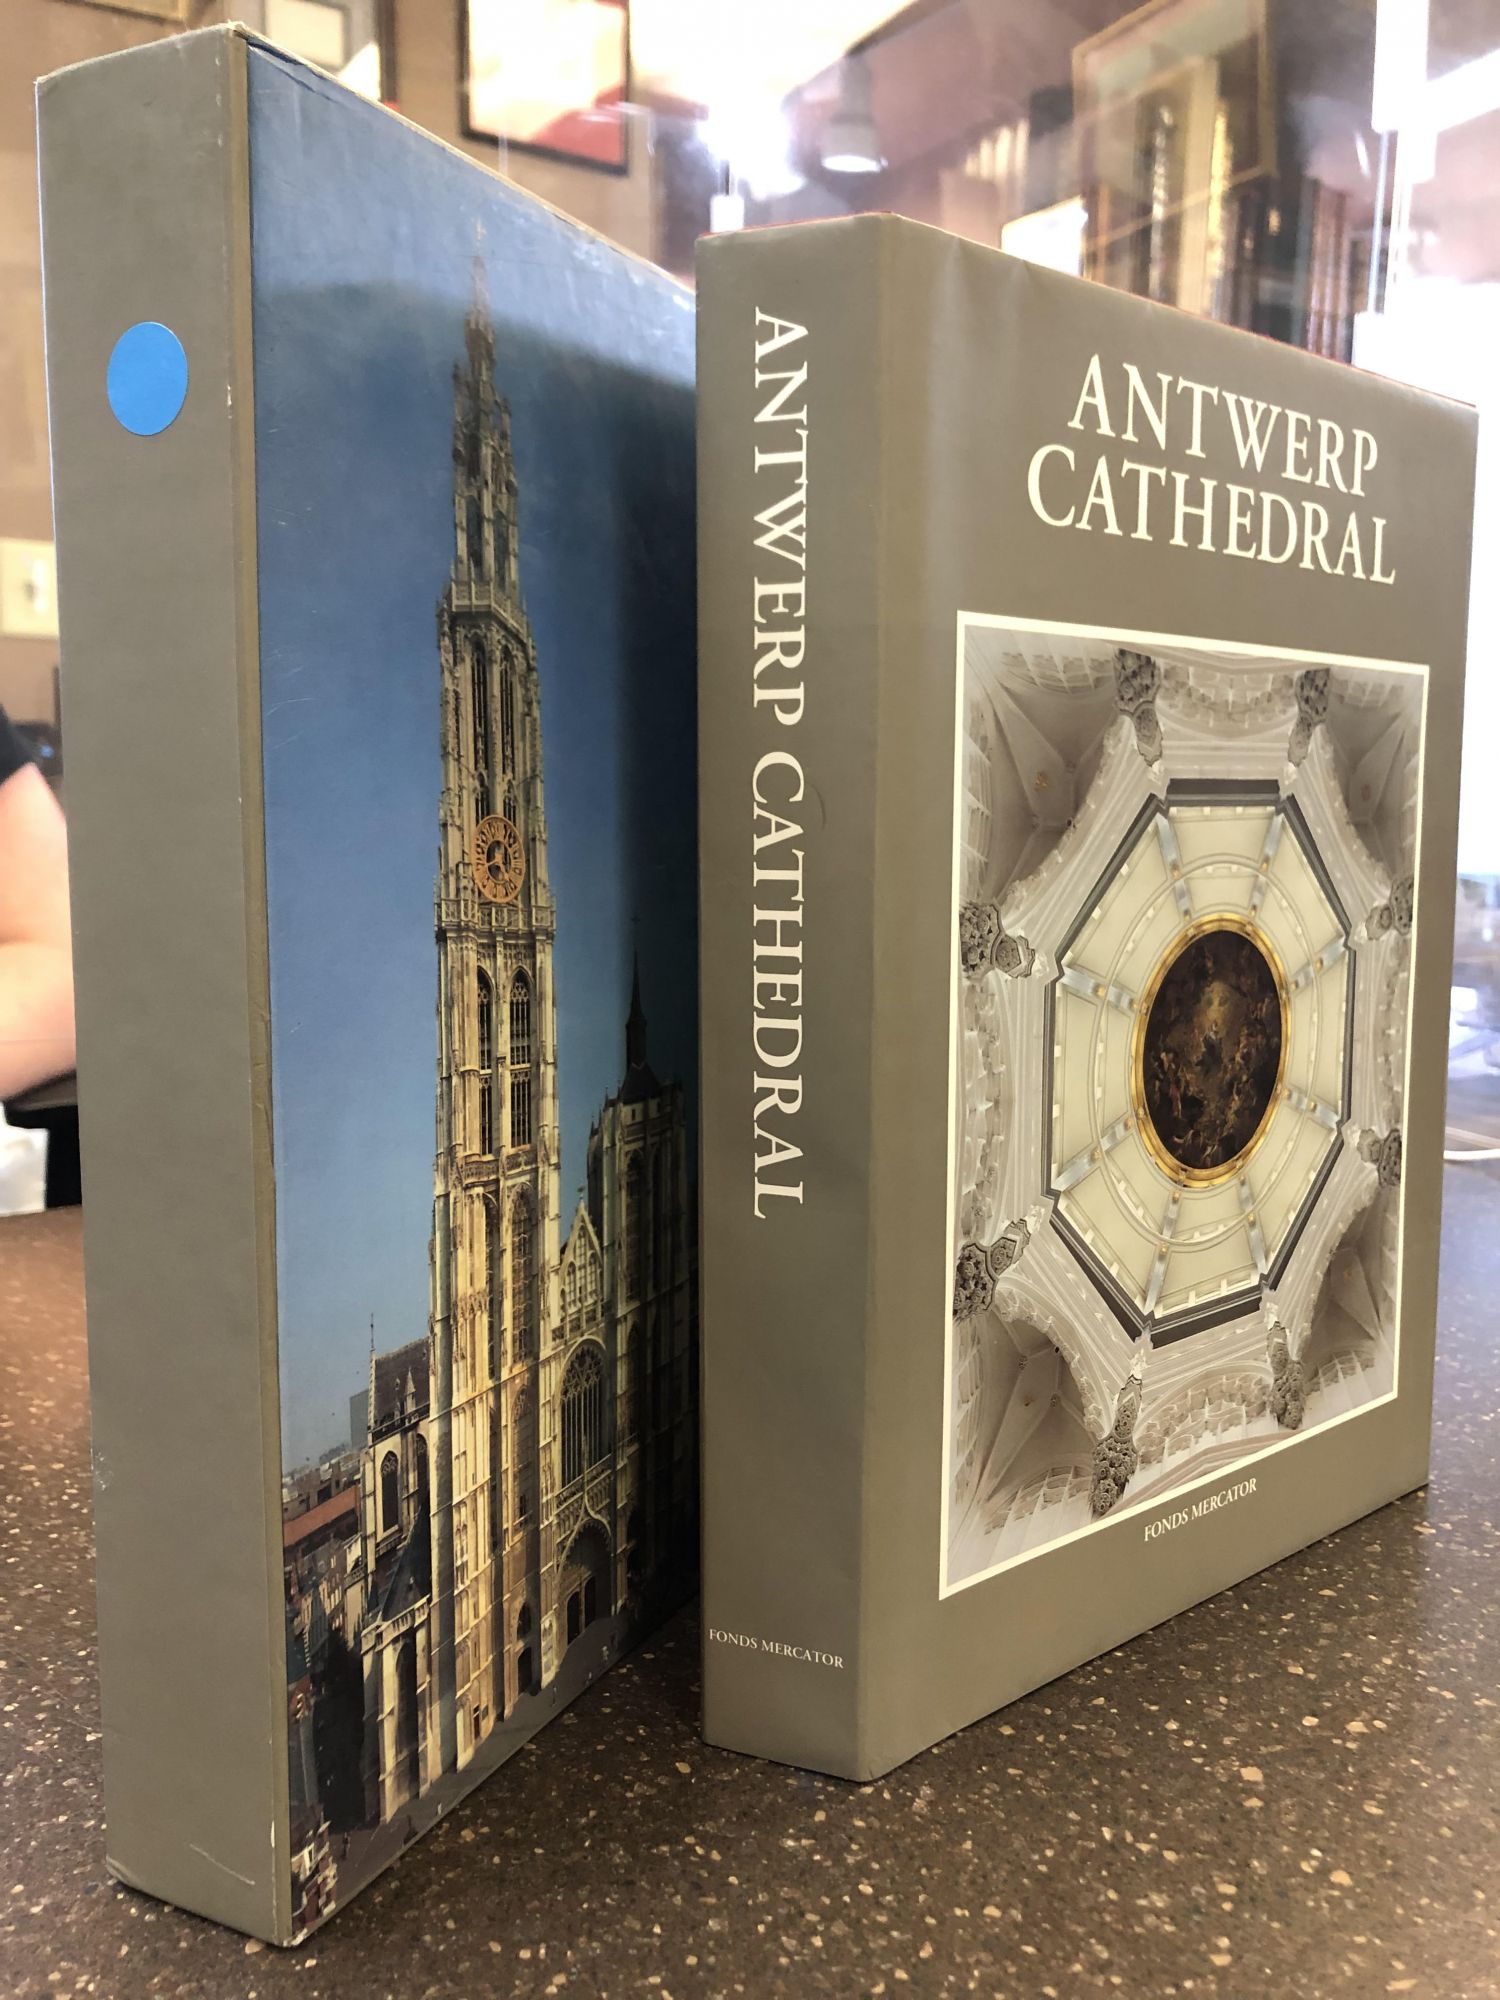 THE CATHEDRAL OF OUR LADY IN ANTWERP - Aerts, W. [editor]; Kinsbergen, A. [preface]; Weir, C. [translator]; Weir, A. [translator]